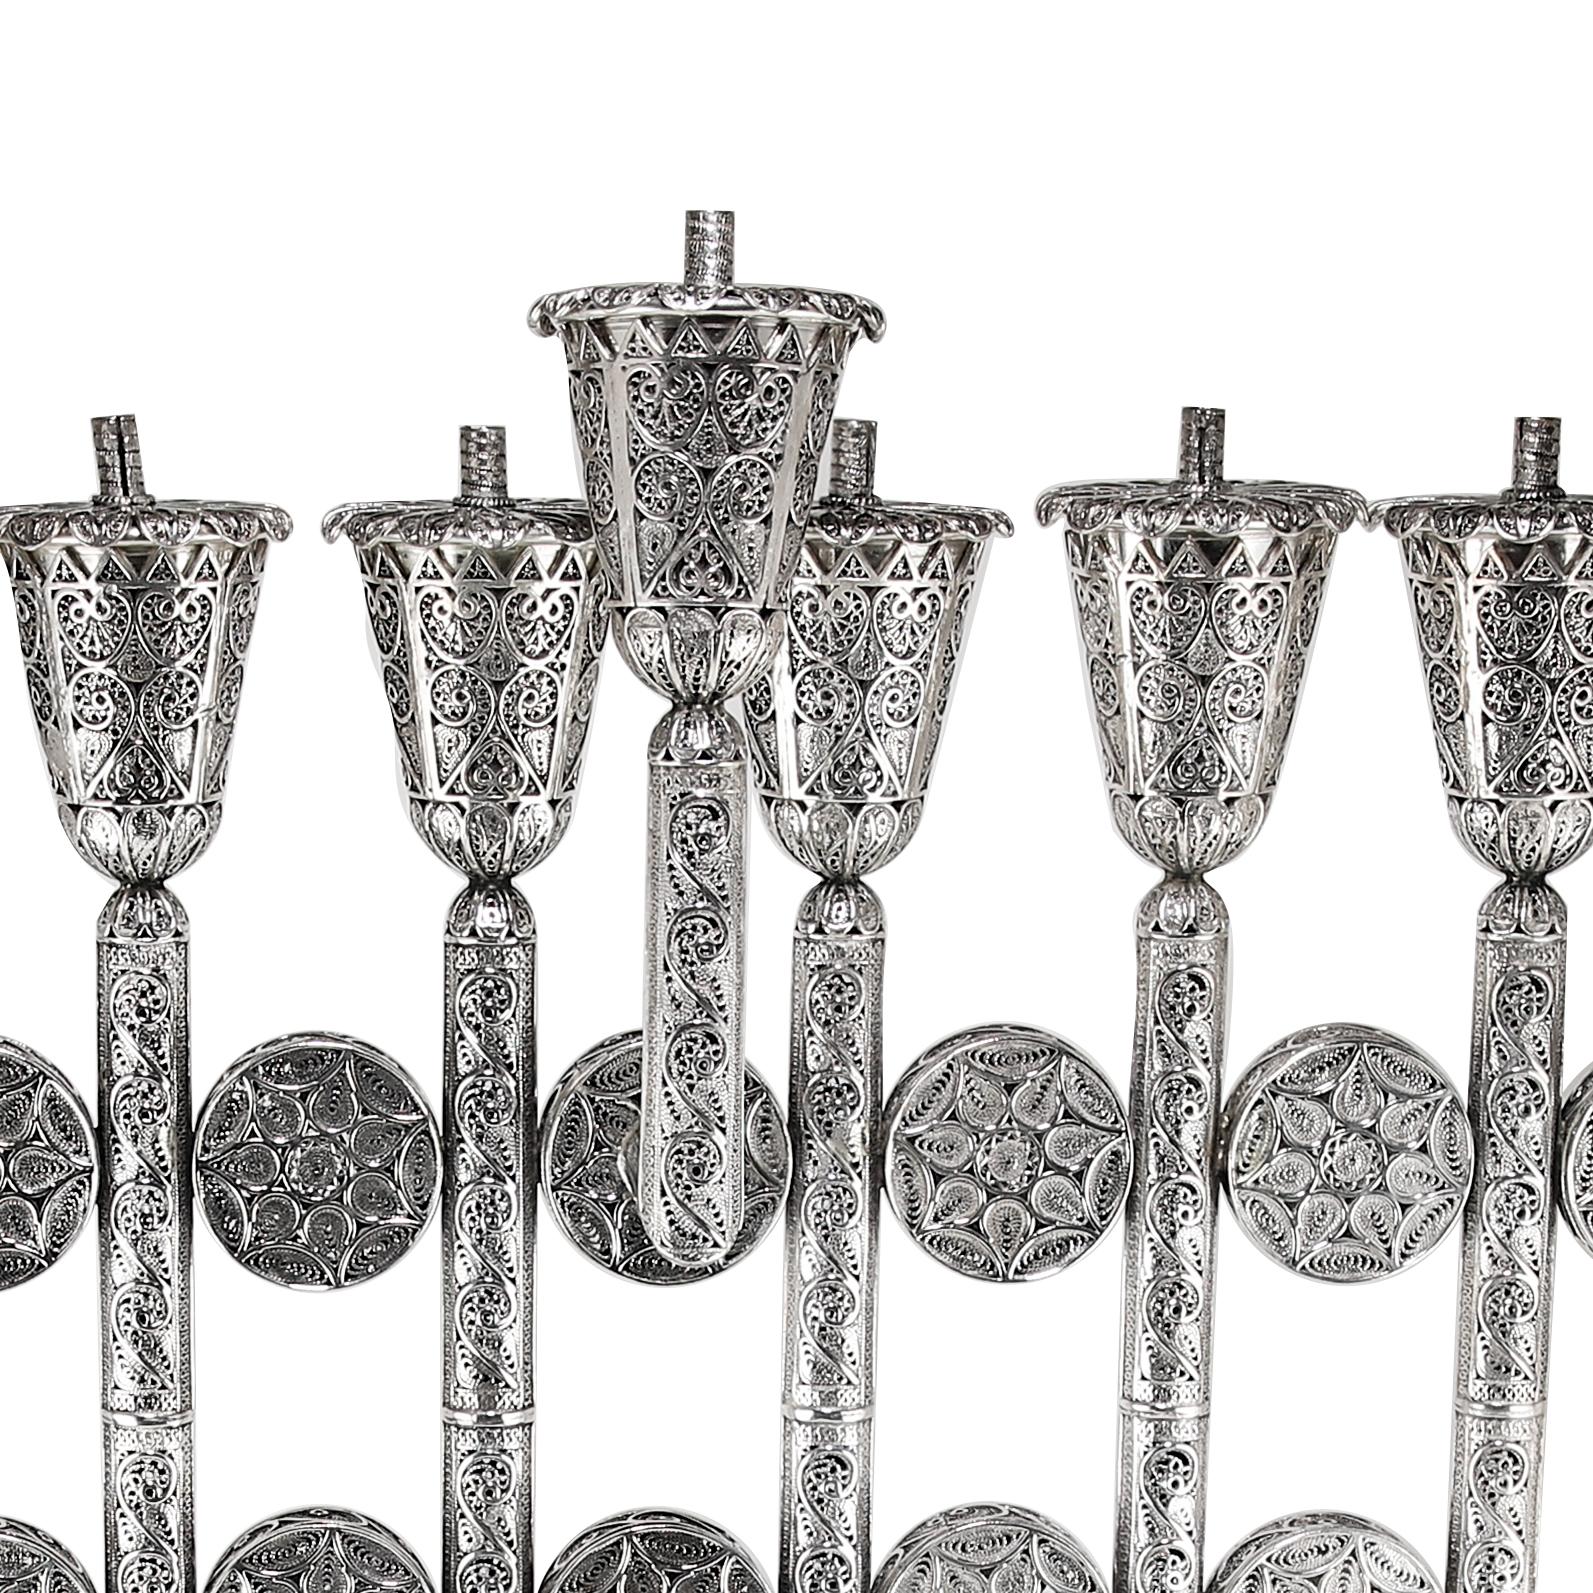 A beautiful piece to celebrate the important holiday of Hanukkah with. This menorah is all handmade from Sterling Silver stamped .925, in Israel by a yemenite artisans with filigree technique that was created 100’s of years ago, and still is being